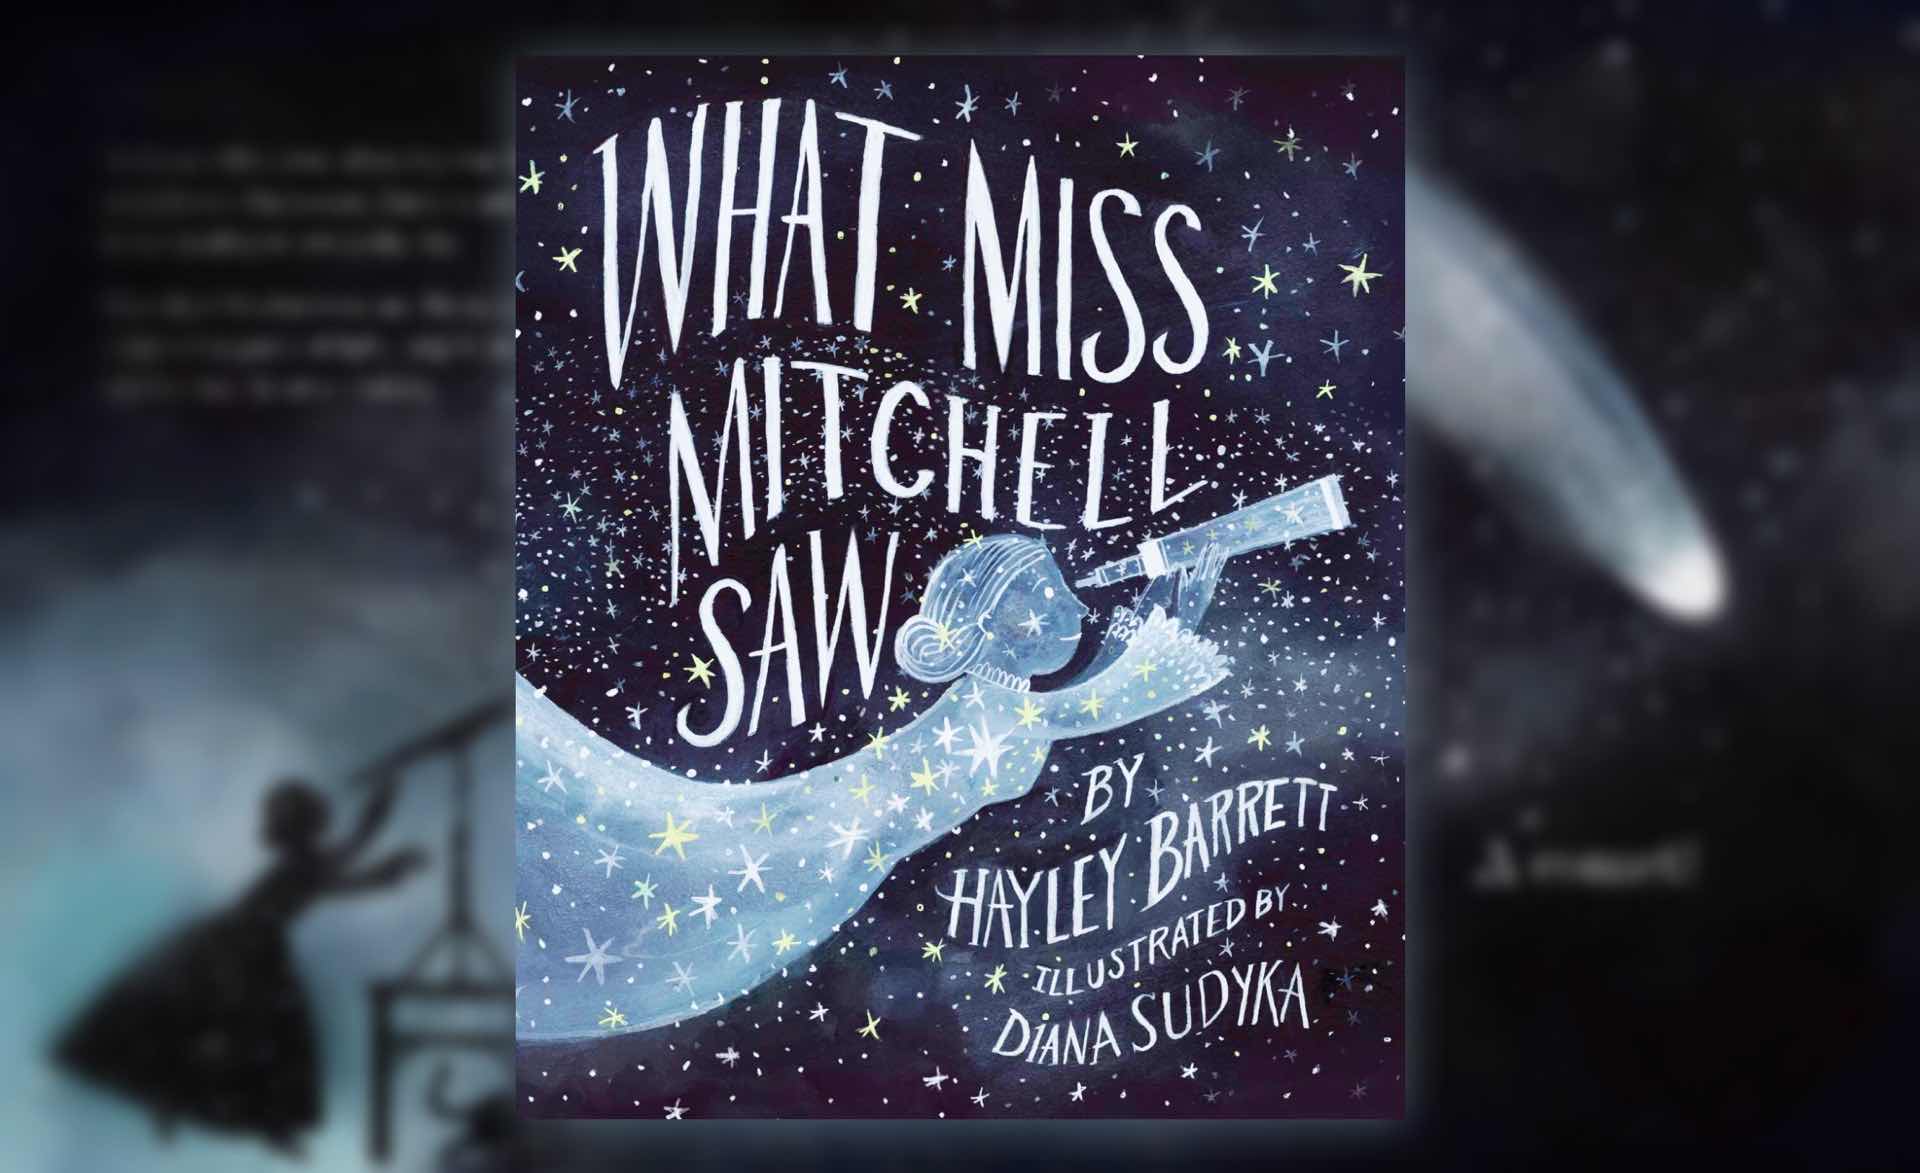 what-miss-mitchell-saw-by-hayley-barrett-and-diana-sudyka